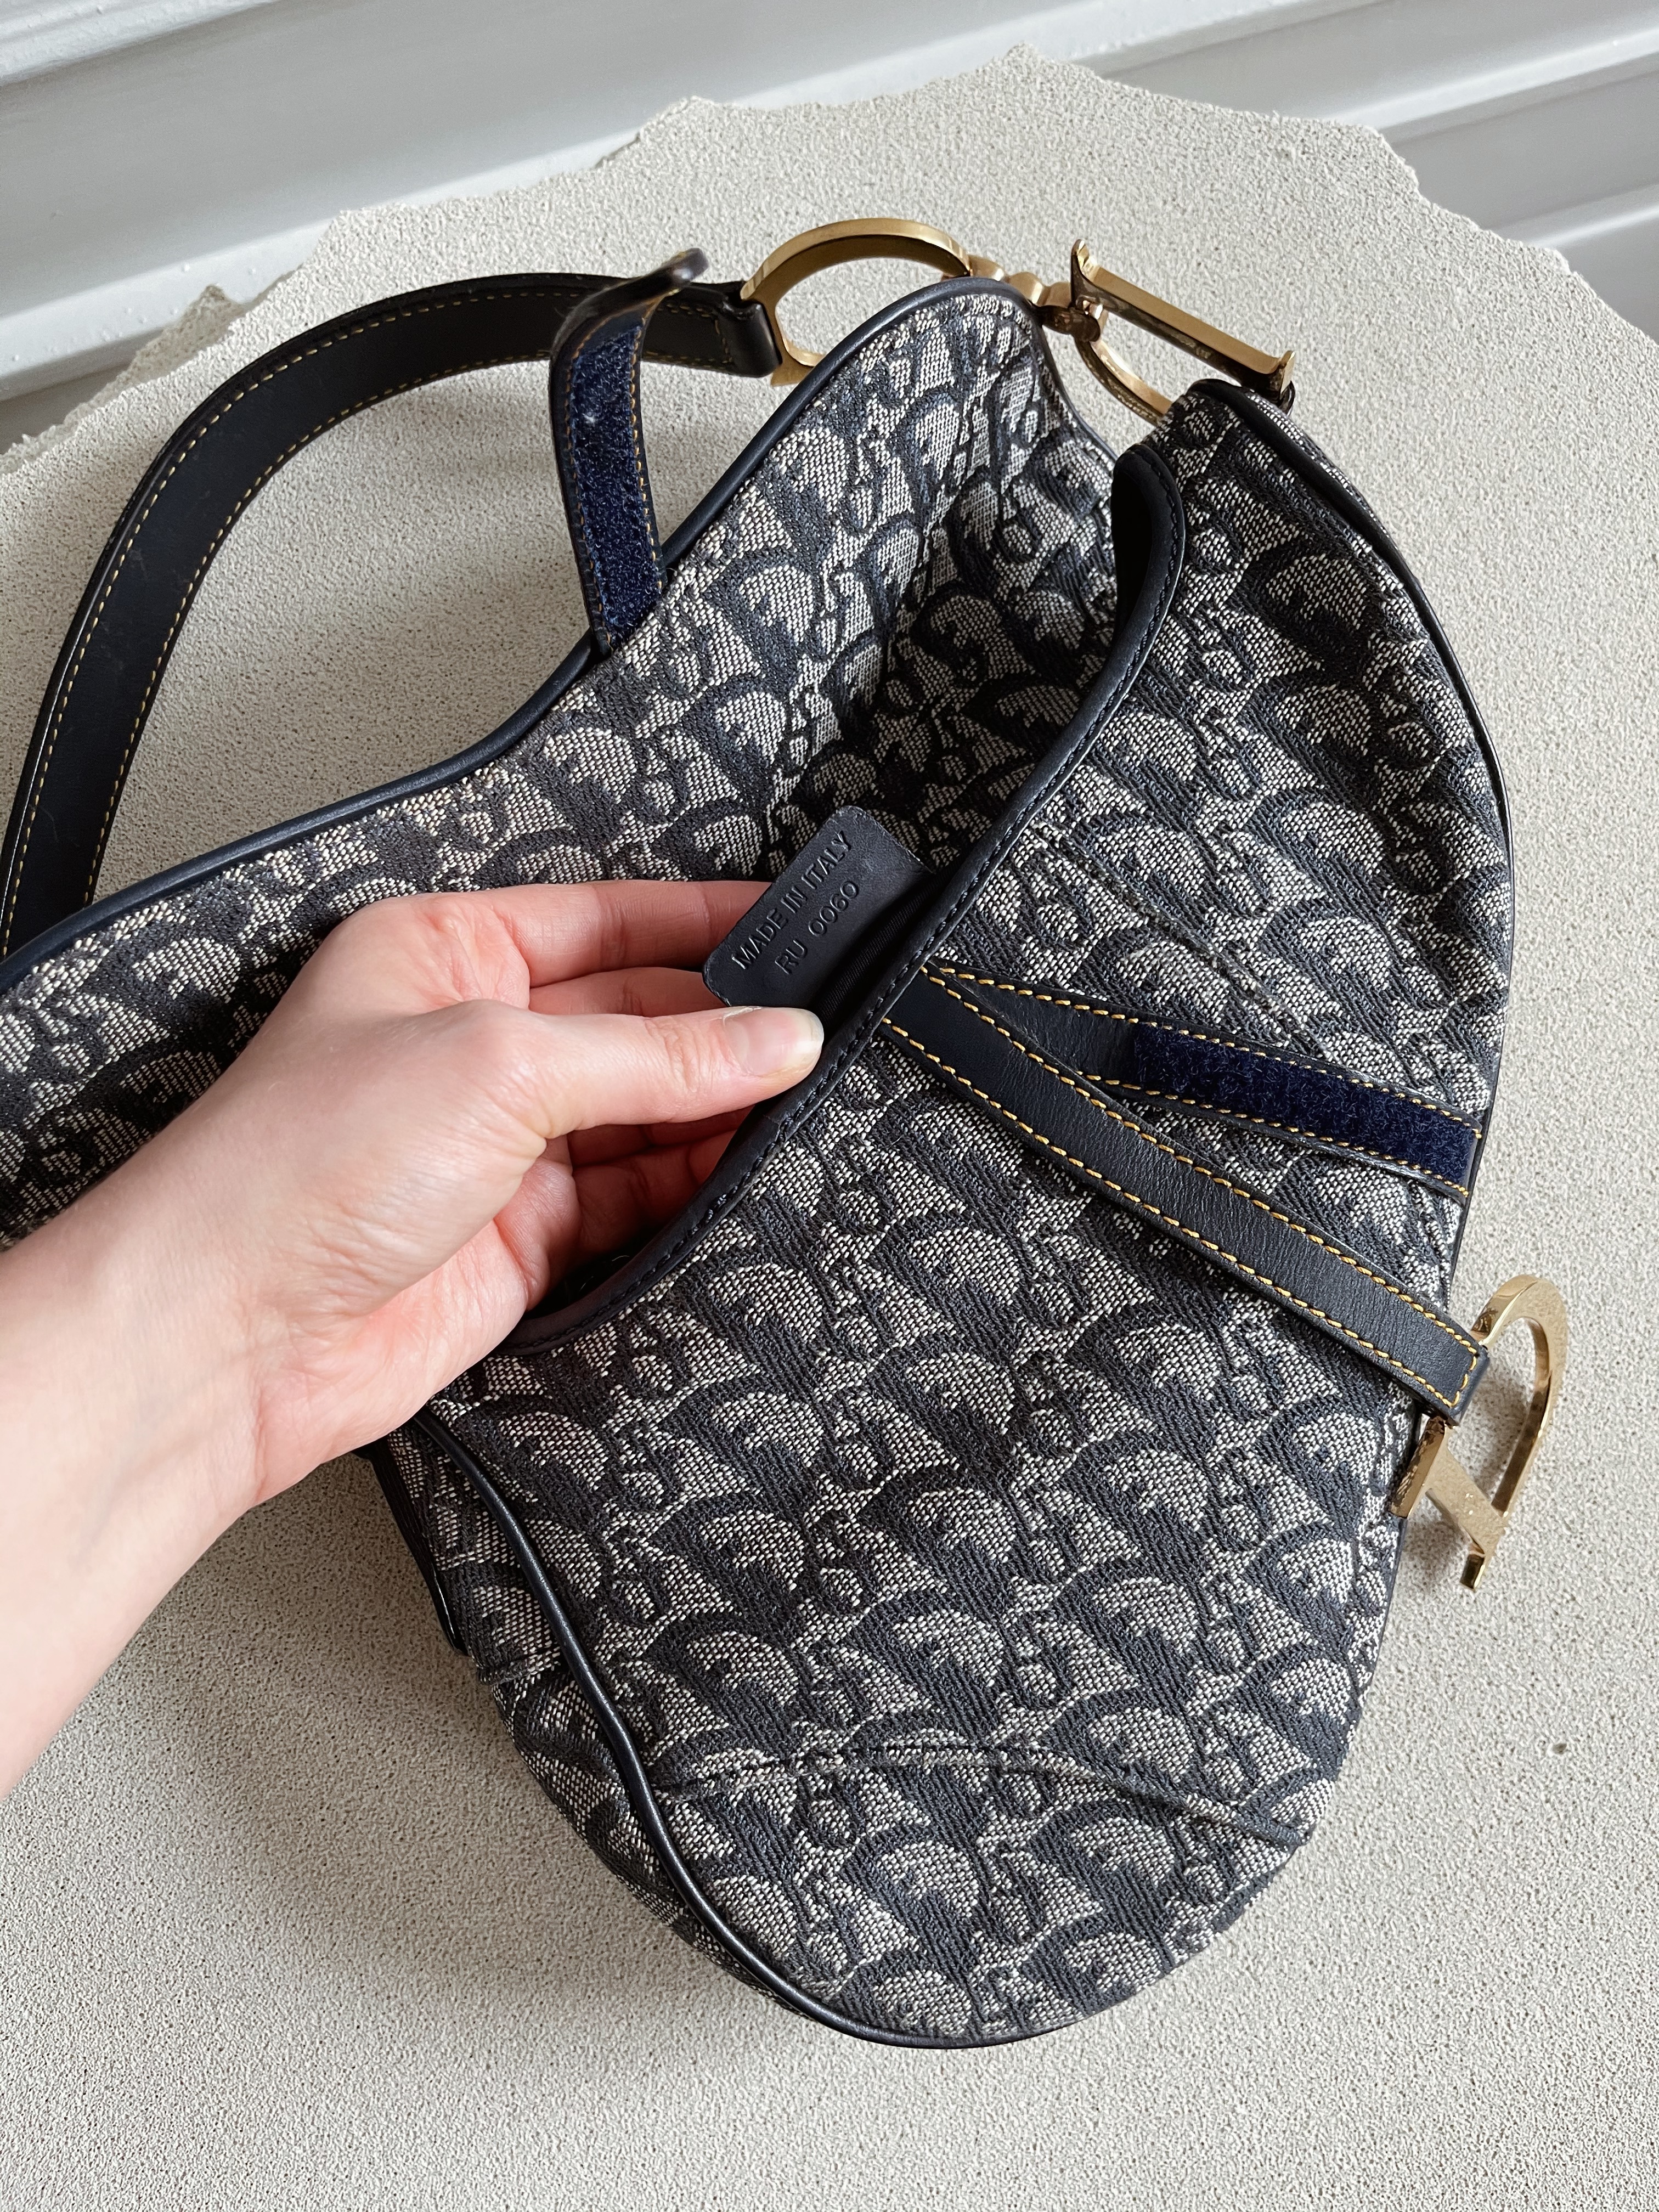 Dior 30 Montaigne Bag Real vs Fake Guide How To Spot A Fake 2023  SizesSale8 Cashback  Extrabux